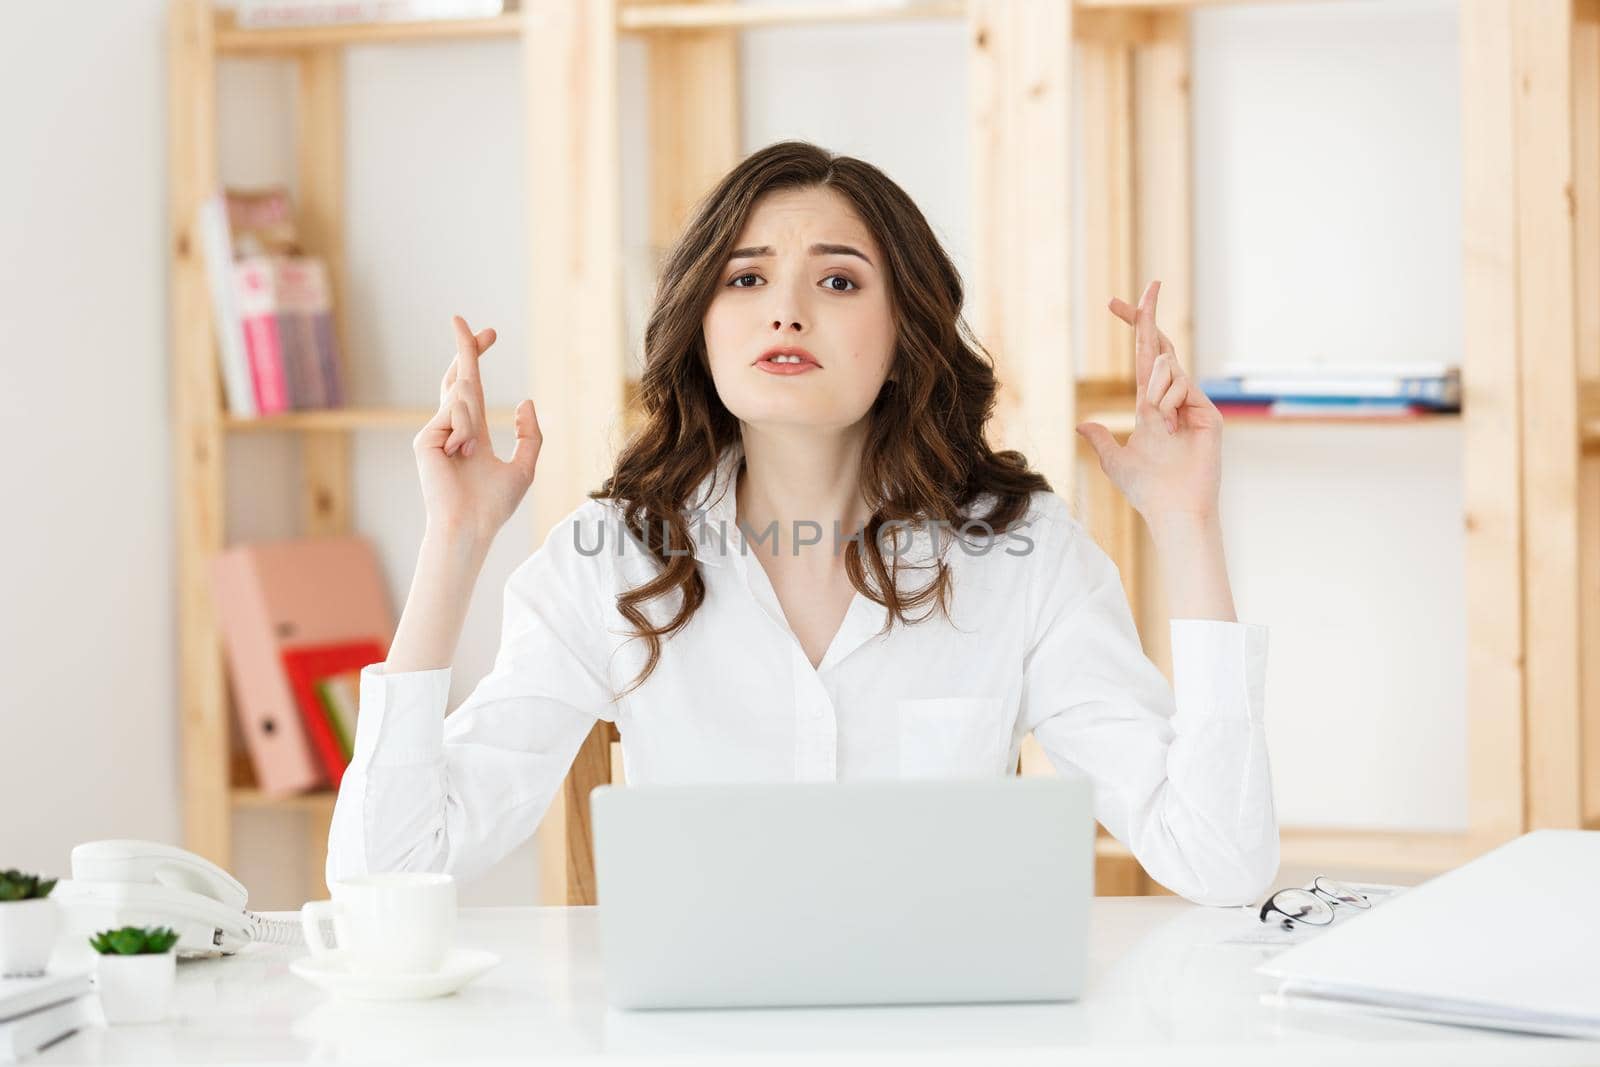 Portrait of happy young caucasian business woman sitting at the office desk and holding fingers crossed isolated over white background.